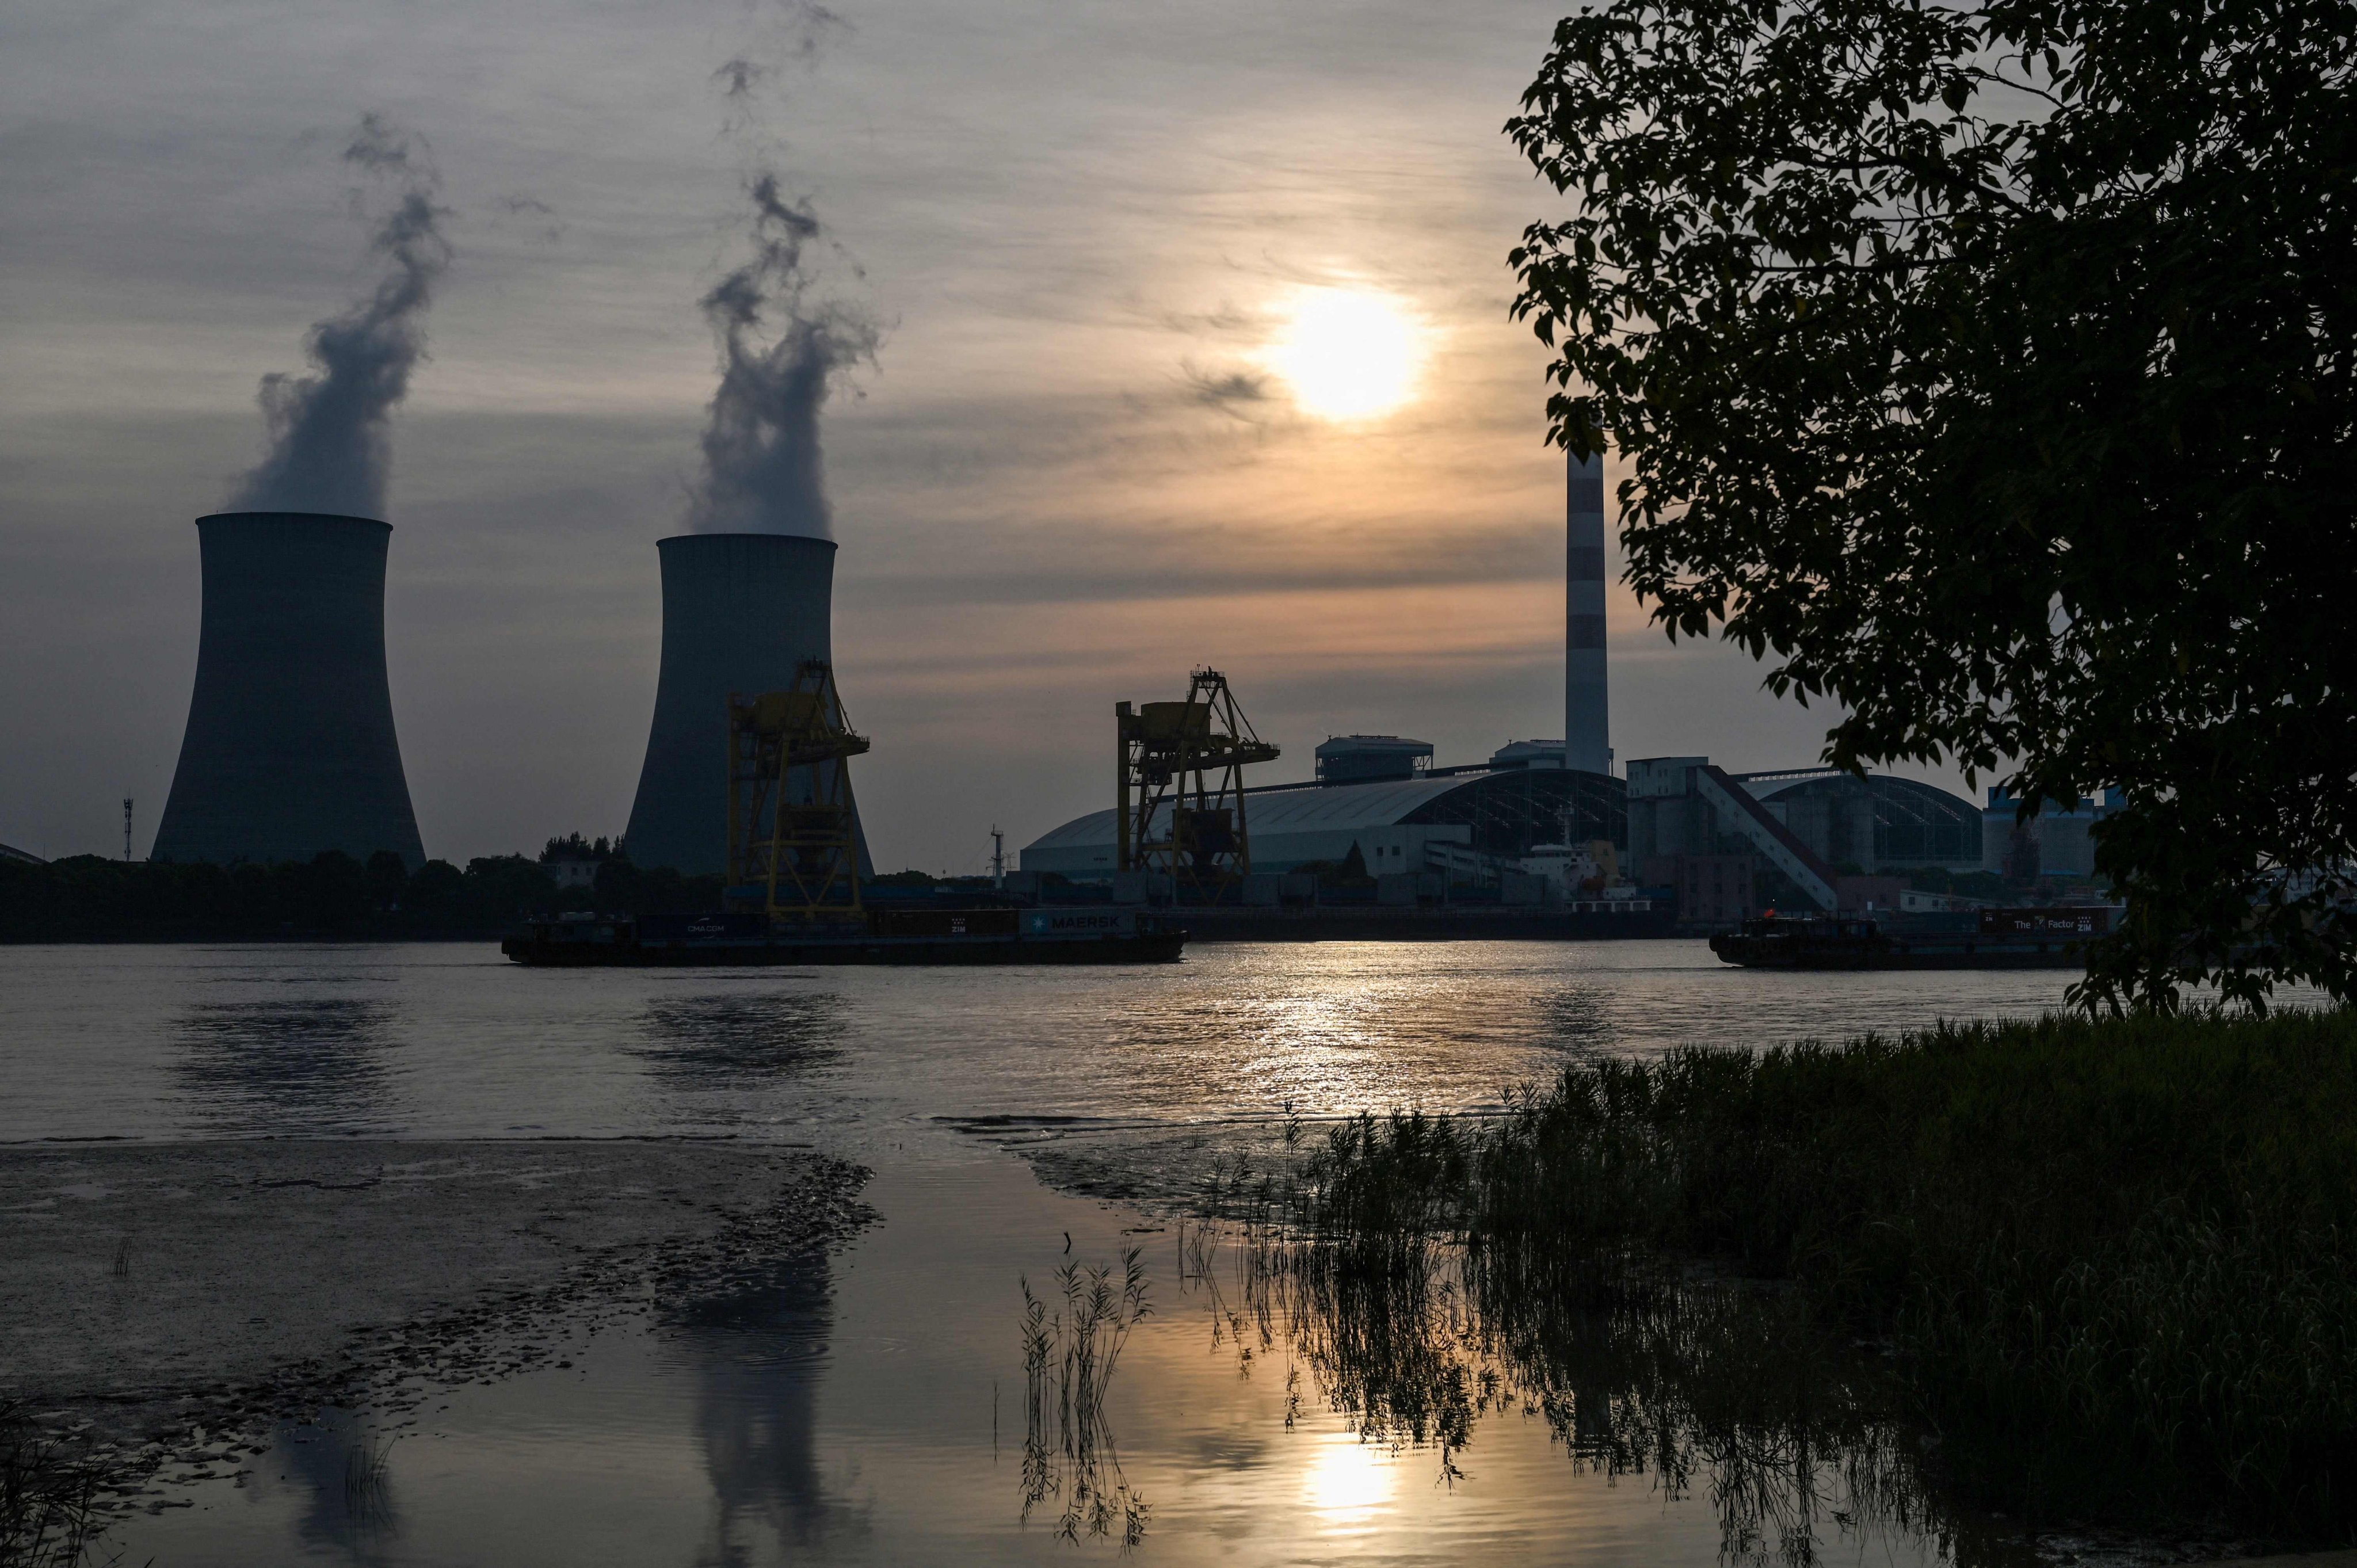 The Wujing coal-electricity power station is seen across the Huangpu River in the Minhang district of Shanghai on August 22, 2022. Photo: AFP